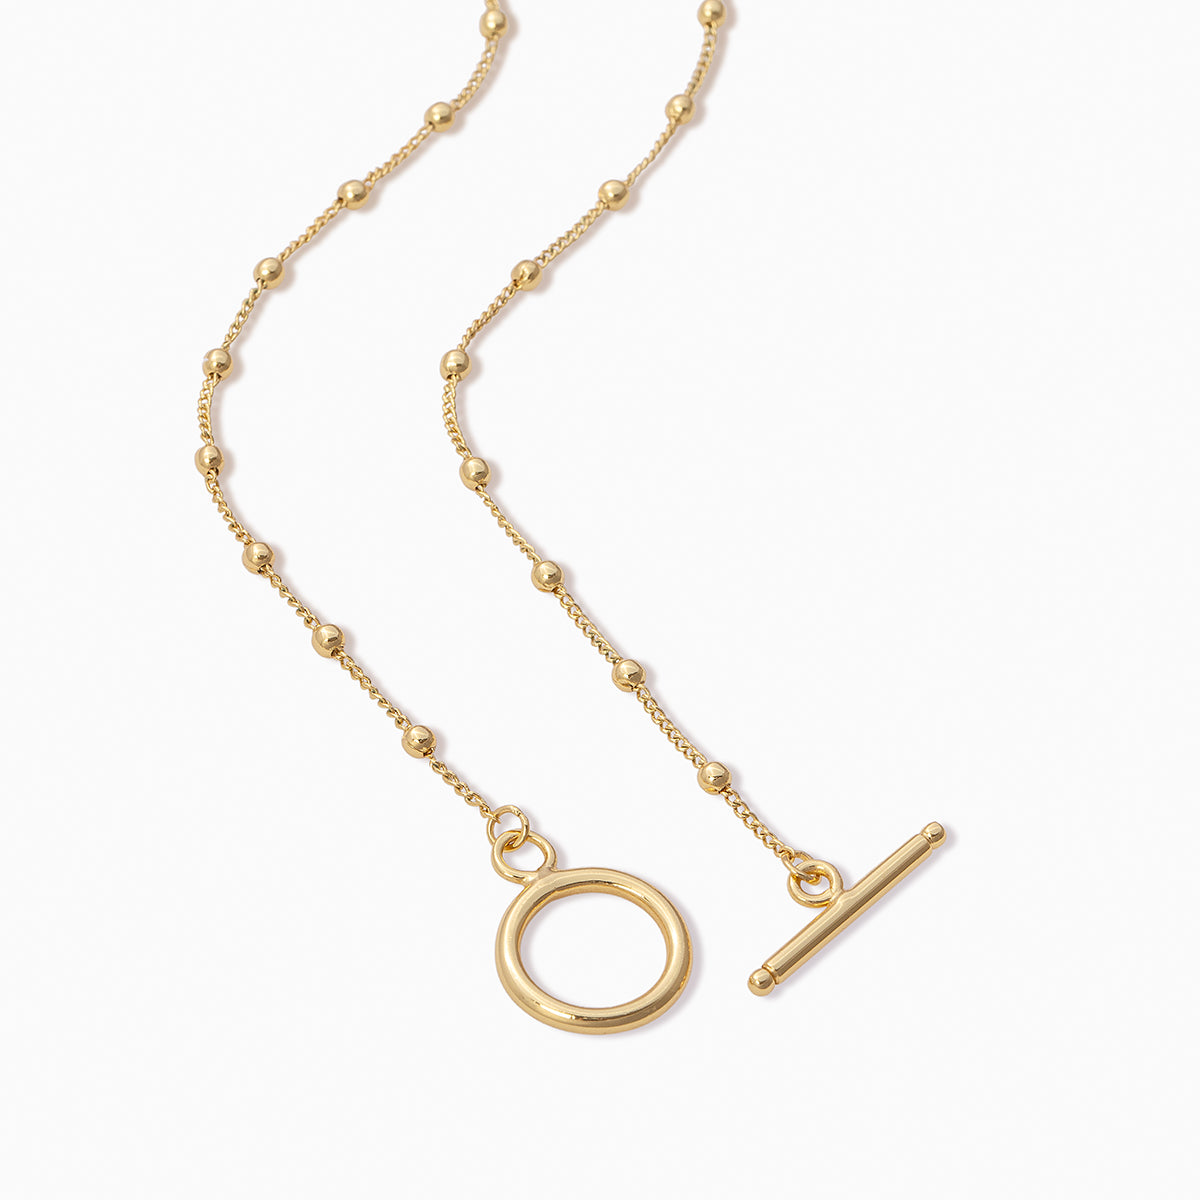 Makin Moves Necklace | Gold | Product Detail Image 2 | Uncommon James